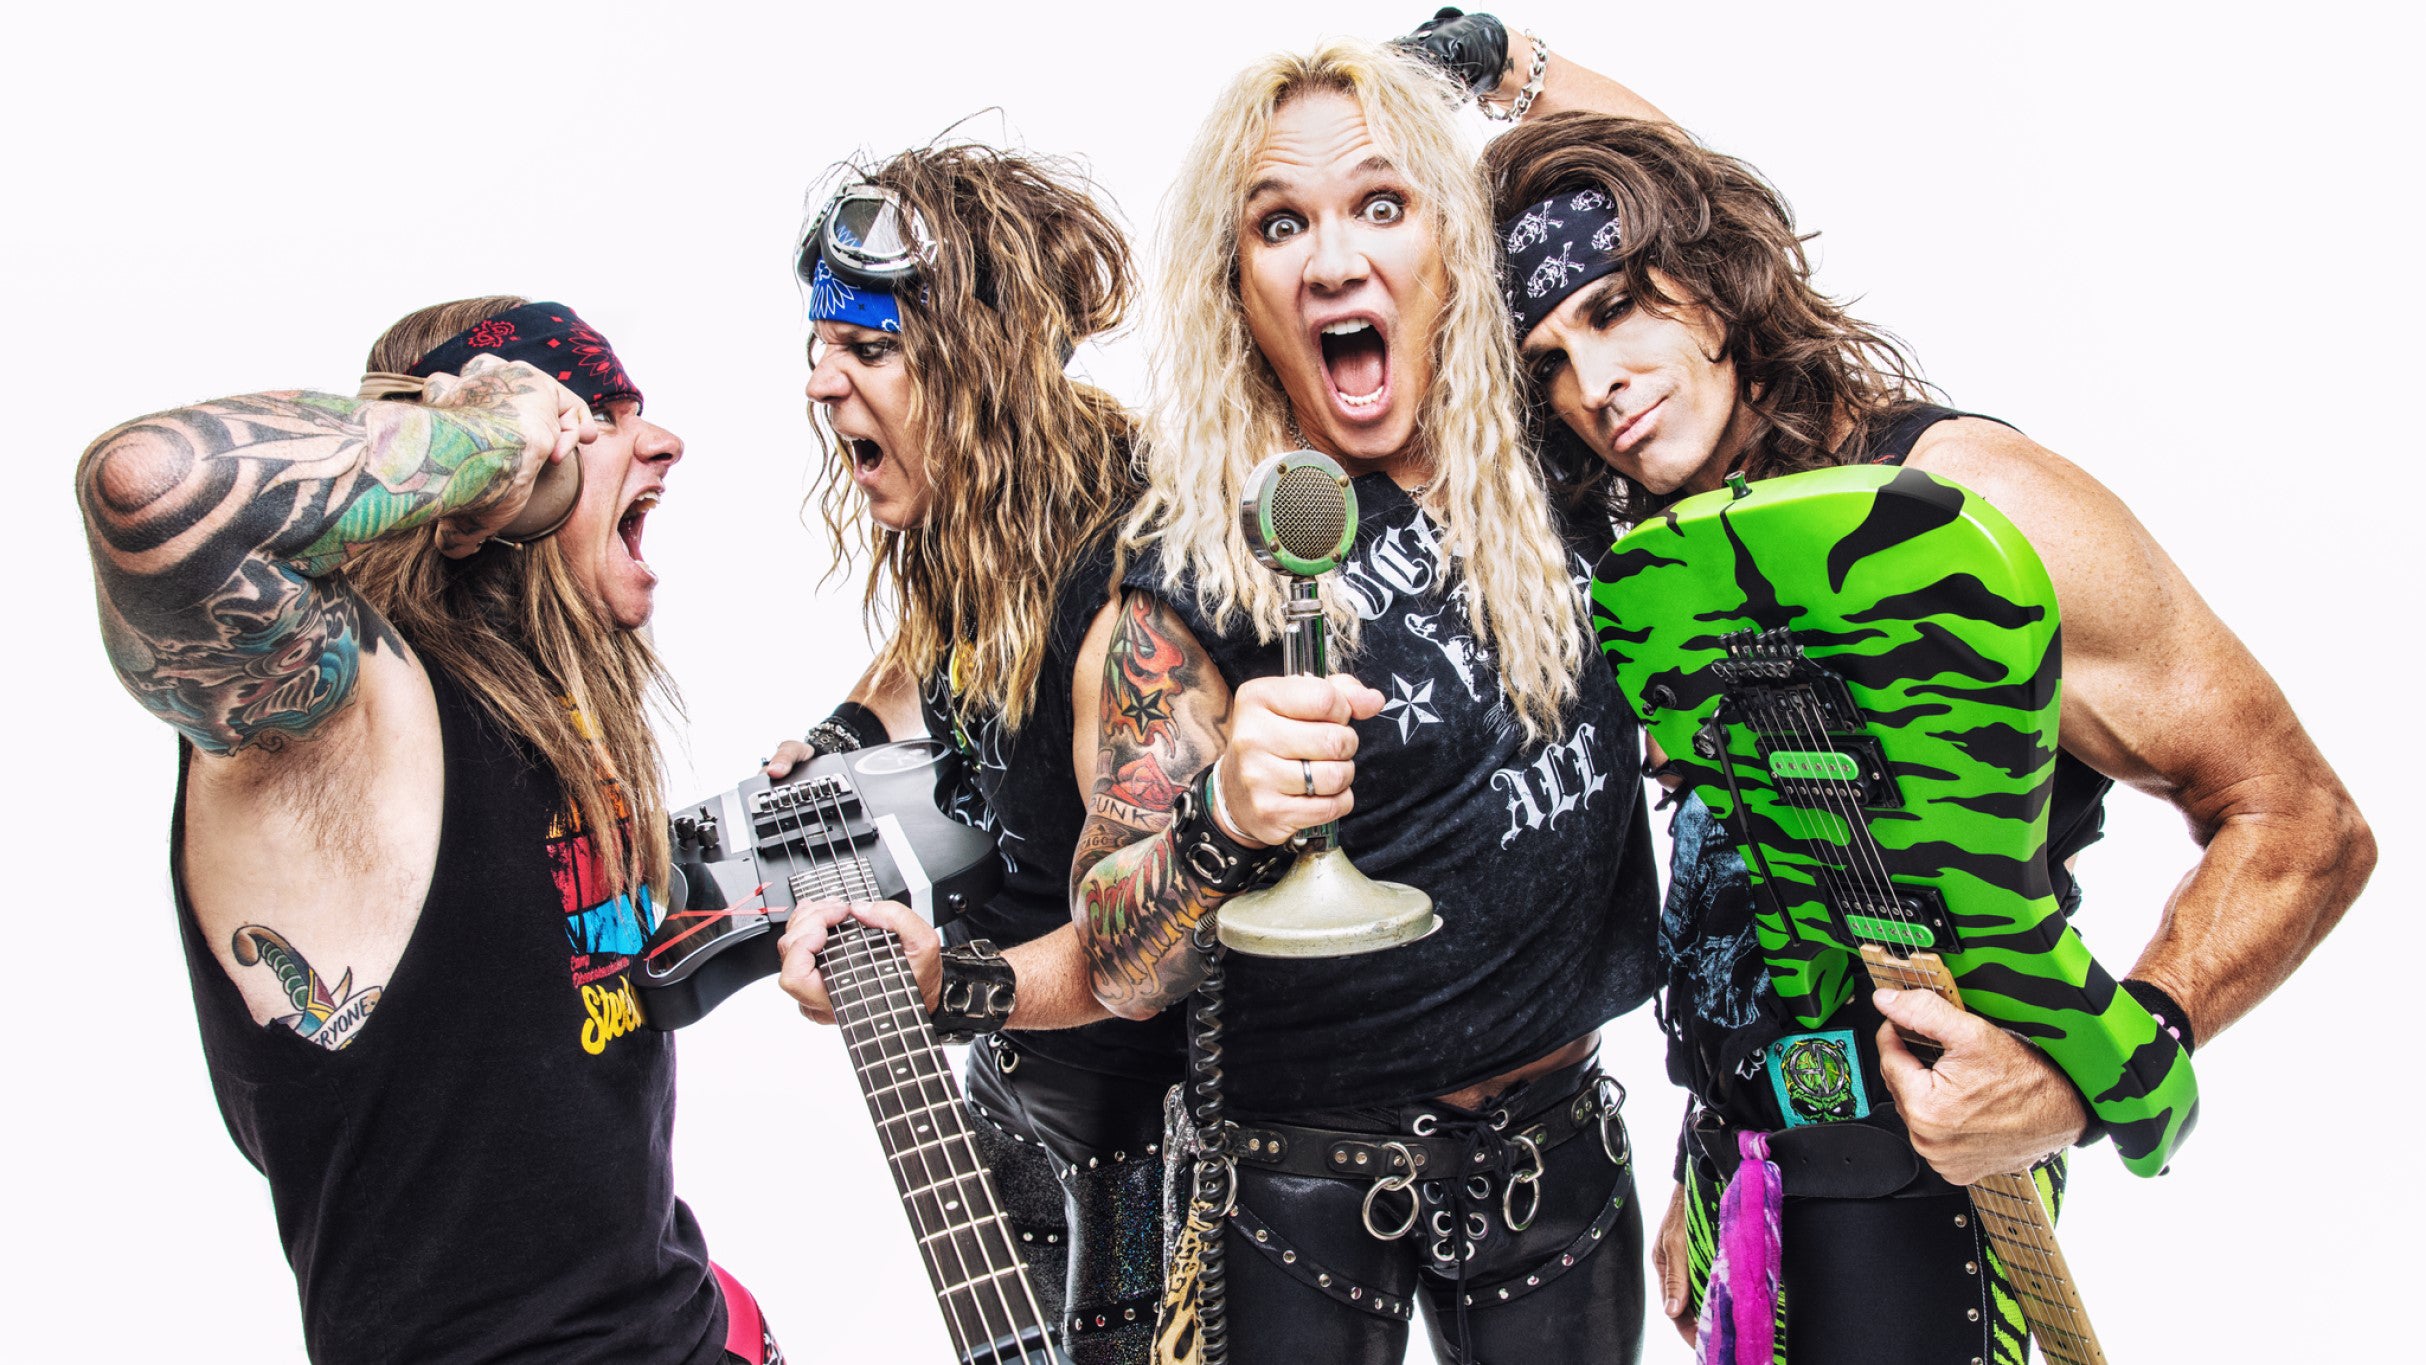 Steel Panther - On The Prowl World Tour presale code for show tickets in Toronto, ON (History)